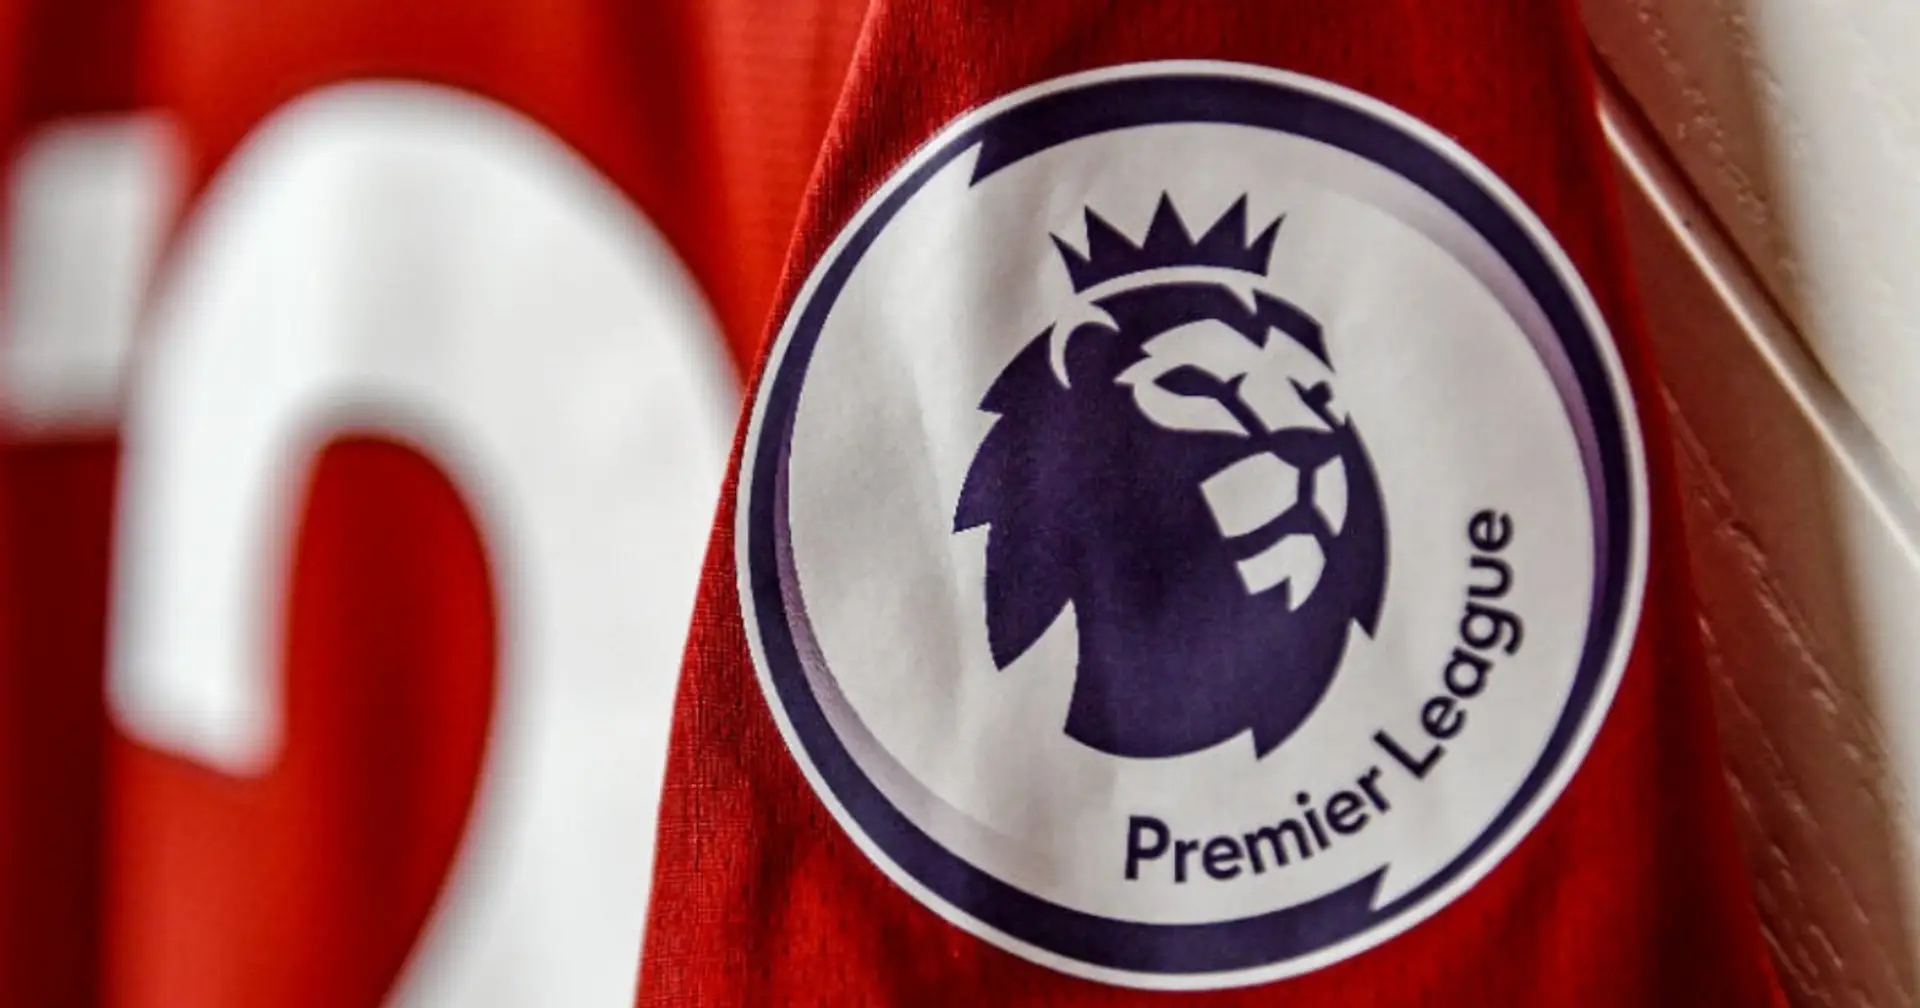 Premier League sets 5-year limit on player contract amortisation & 2 other under-radar stories